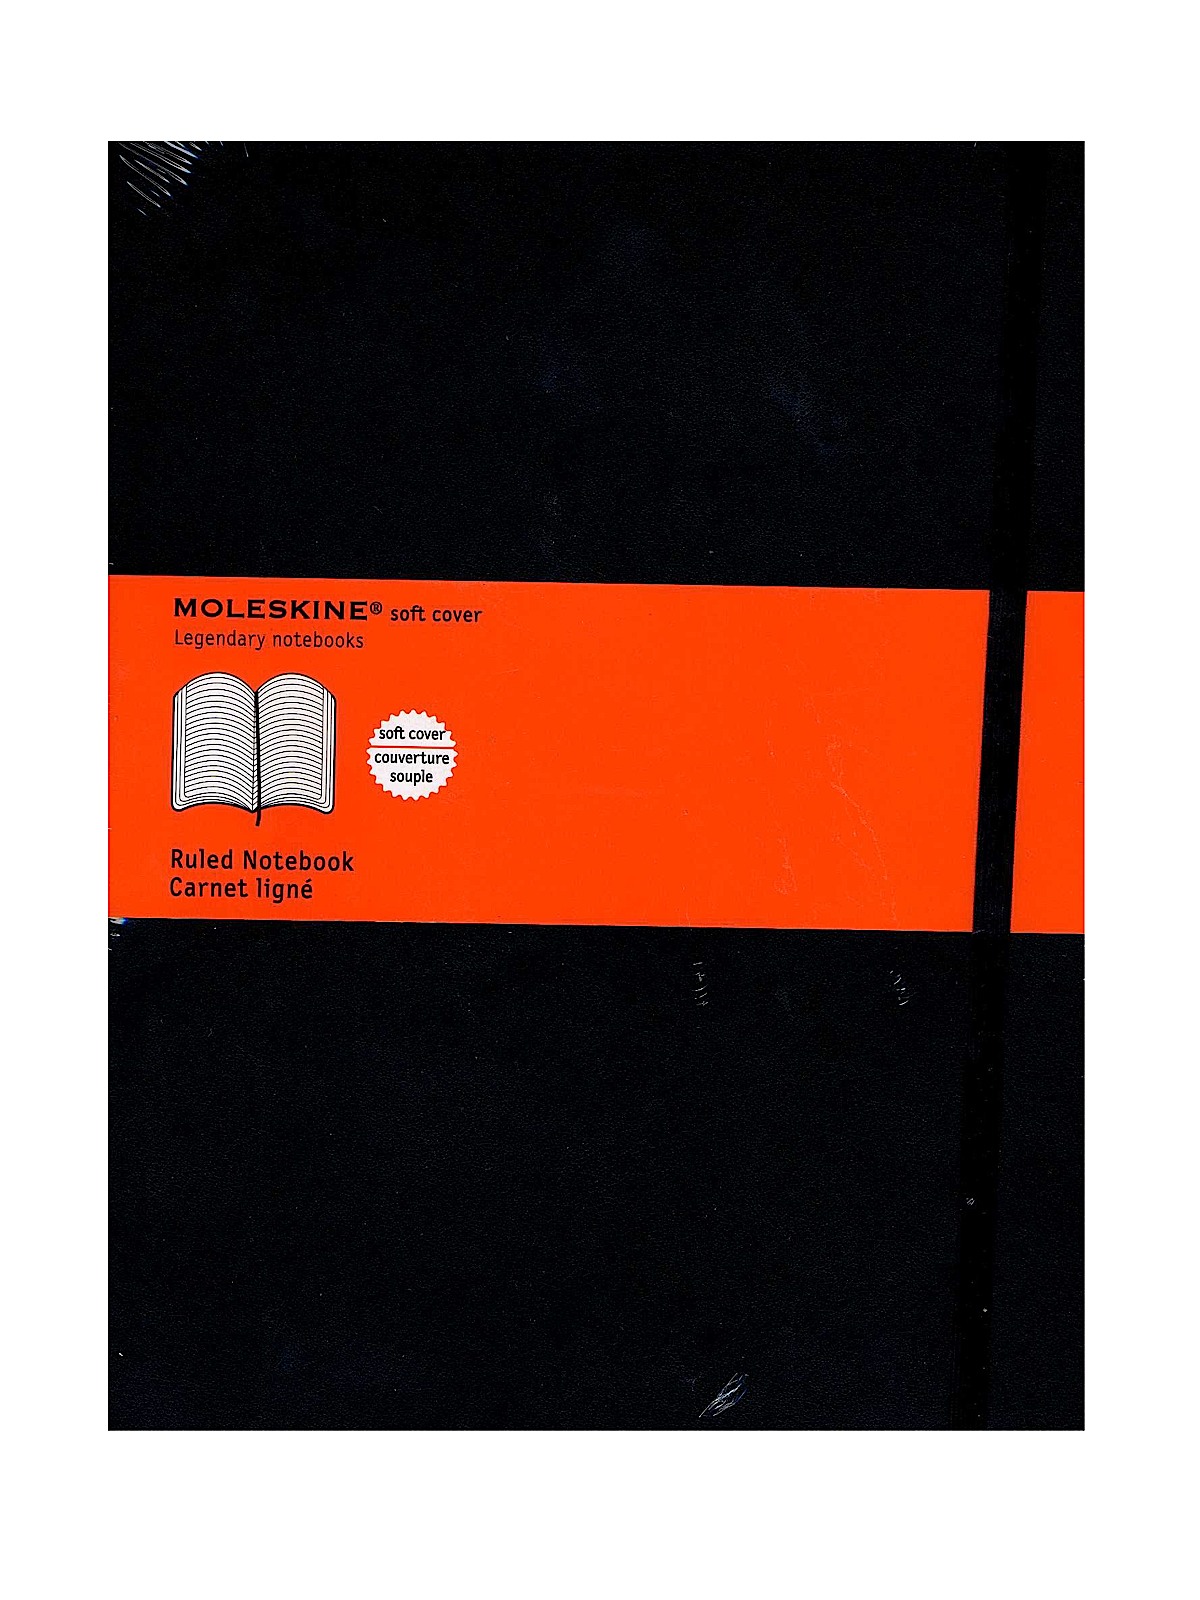 Classic Soft Cover Notebooks Black 7 1 2 In. X 10 In. 192 Pages, Lined